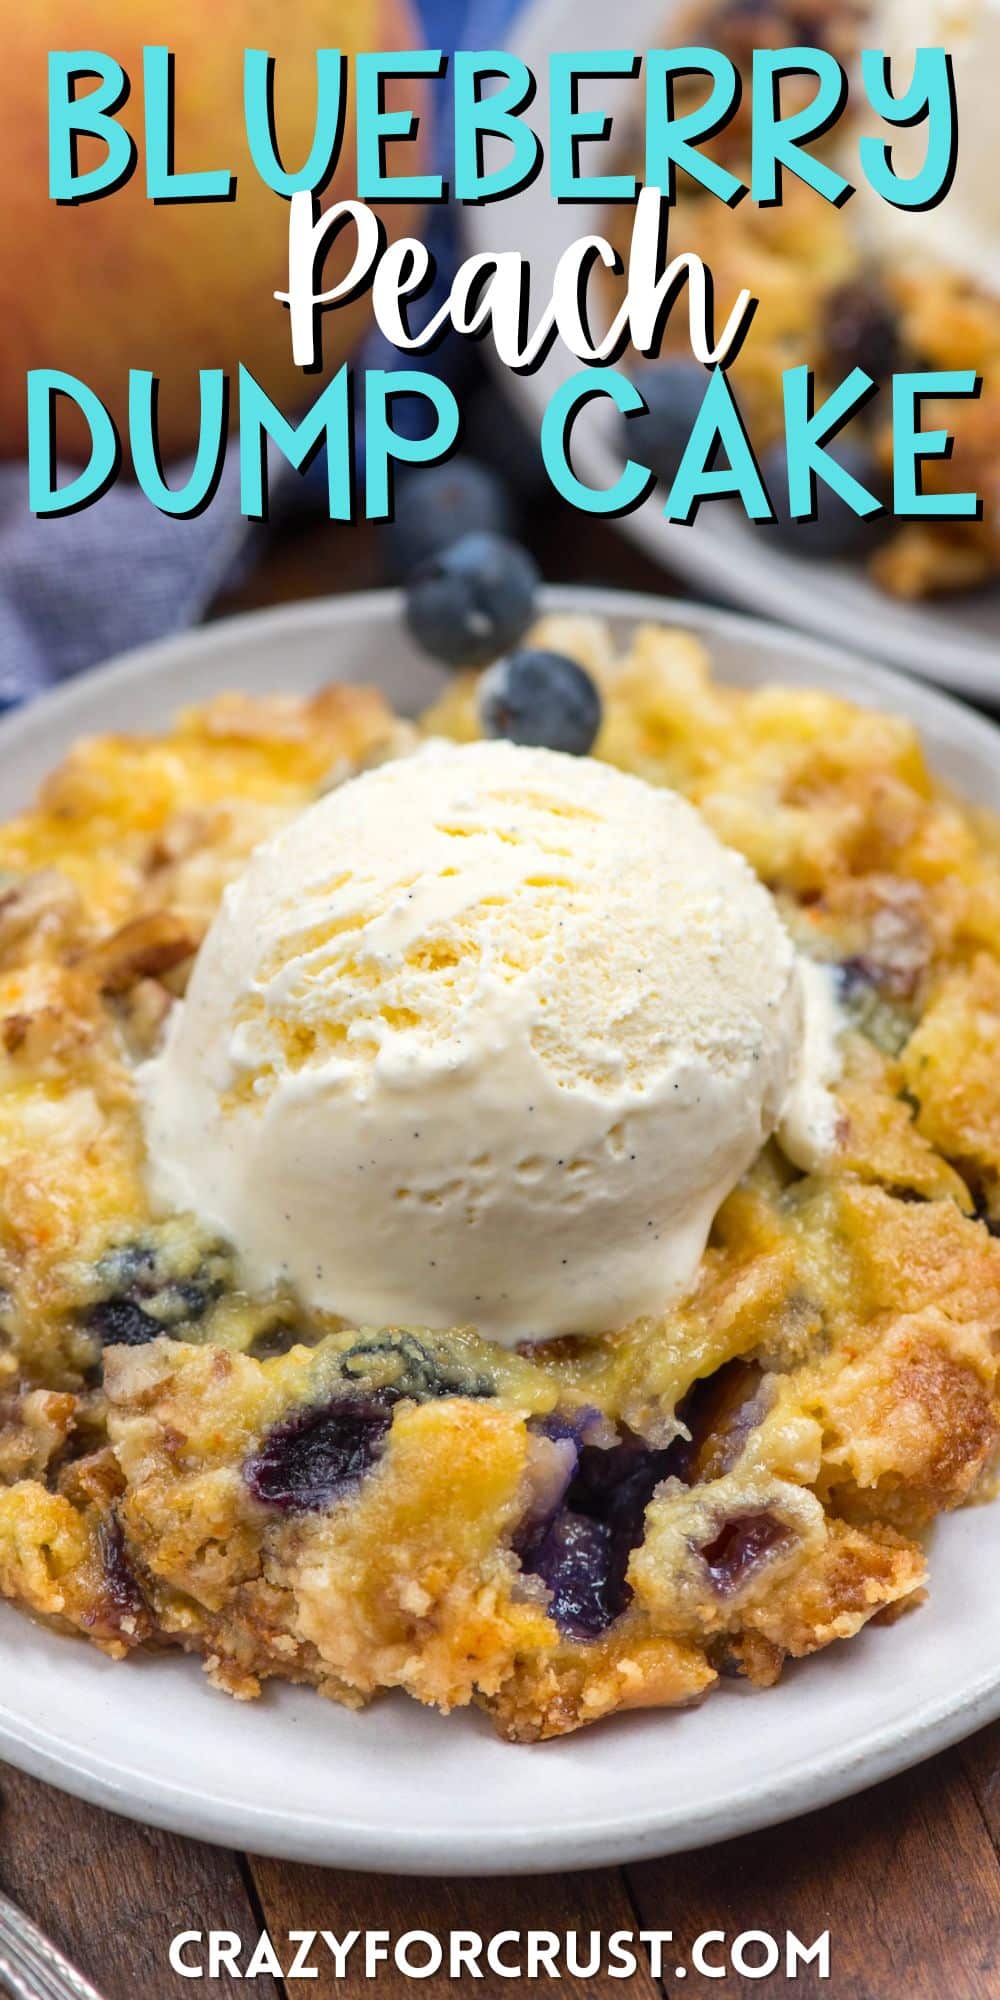 dump cake on a grey plate with blueberries mixed in and a scoop of ice cream on top with words on the image.